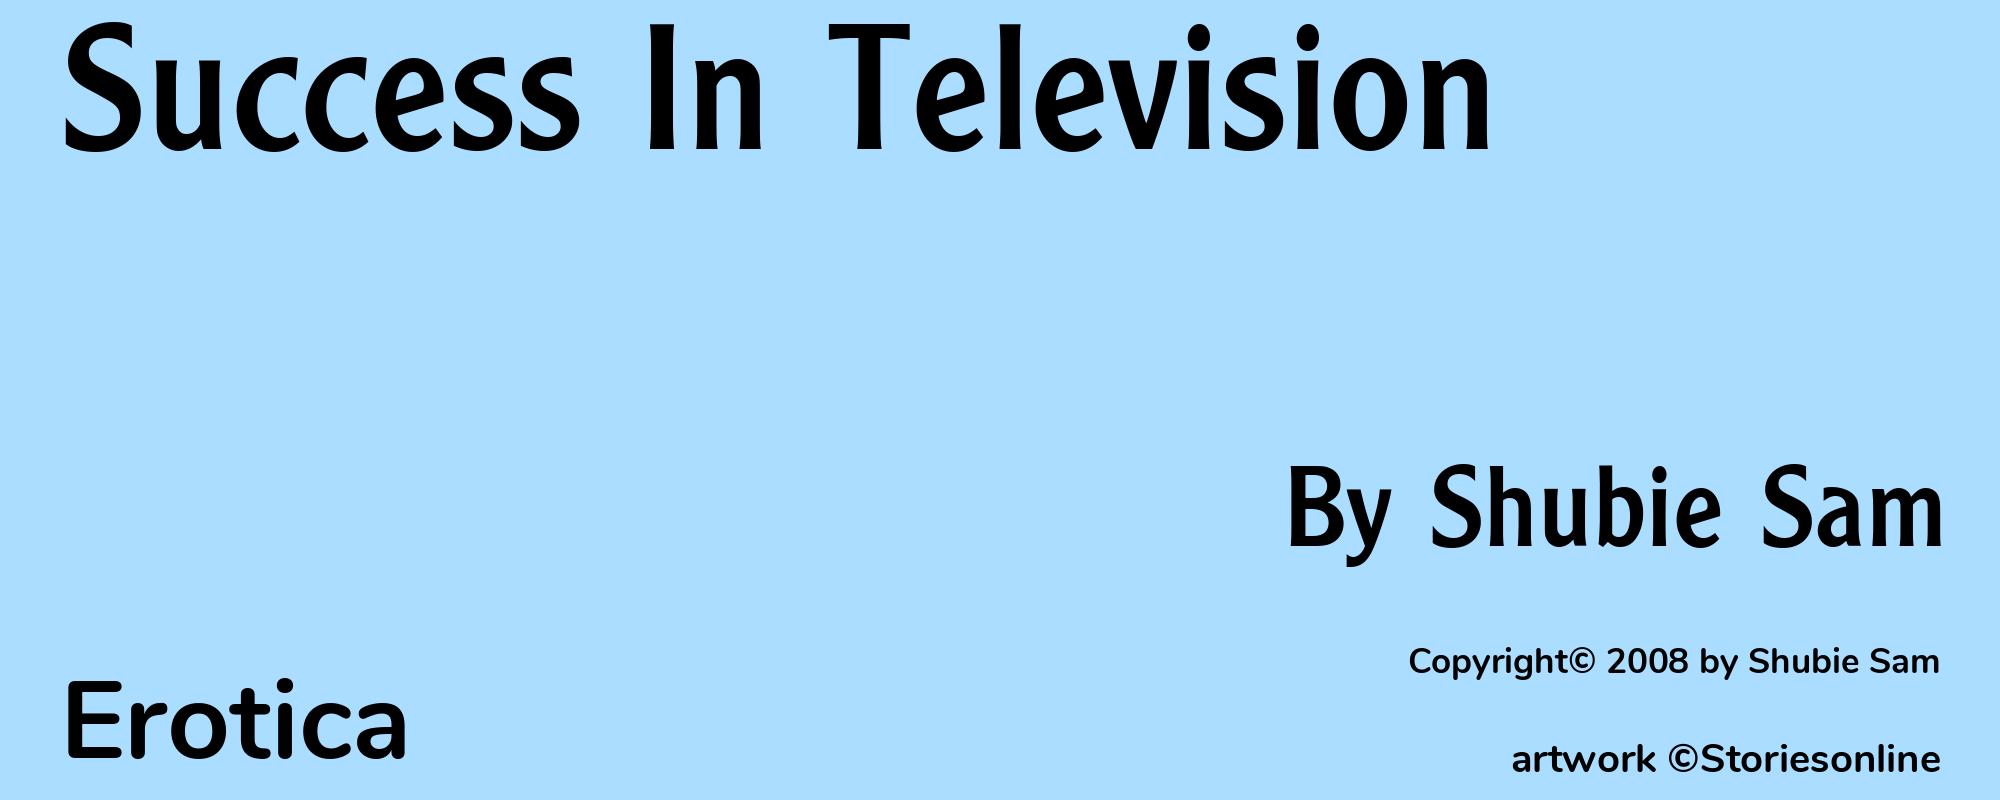 Success In Television - Cover